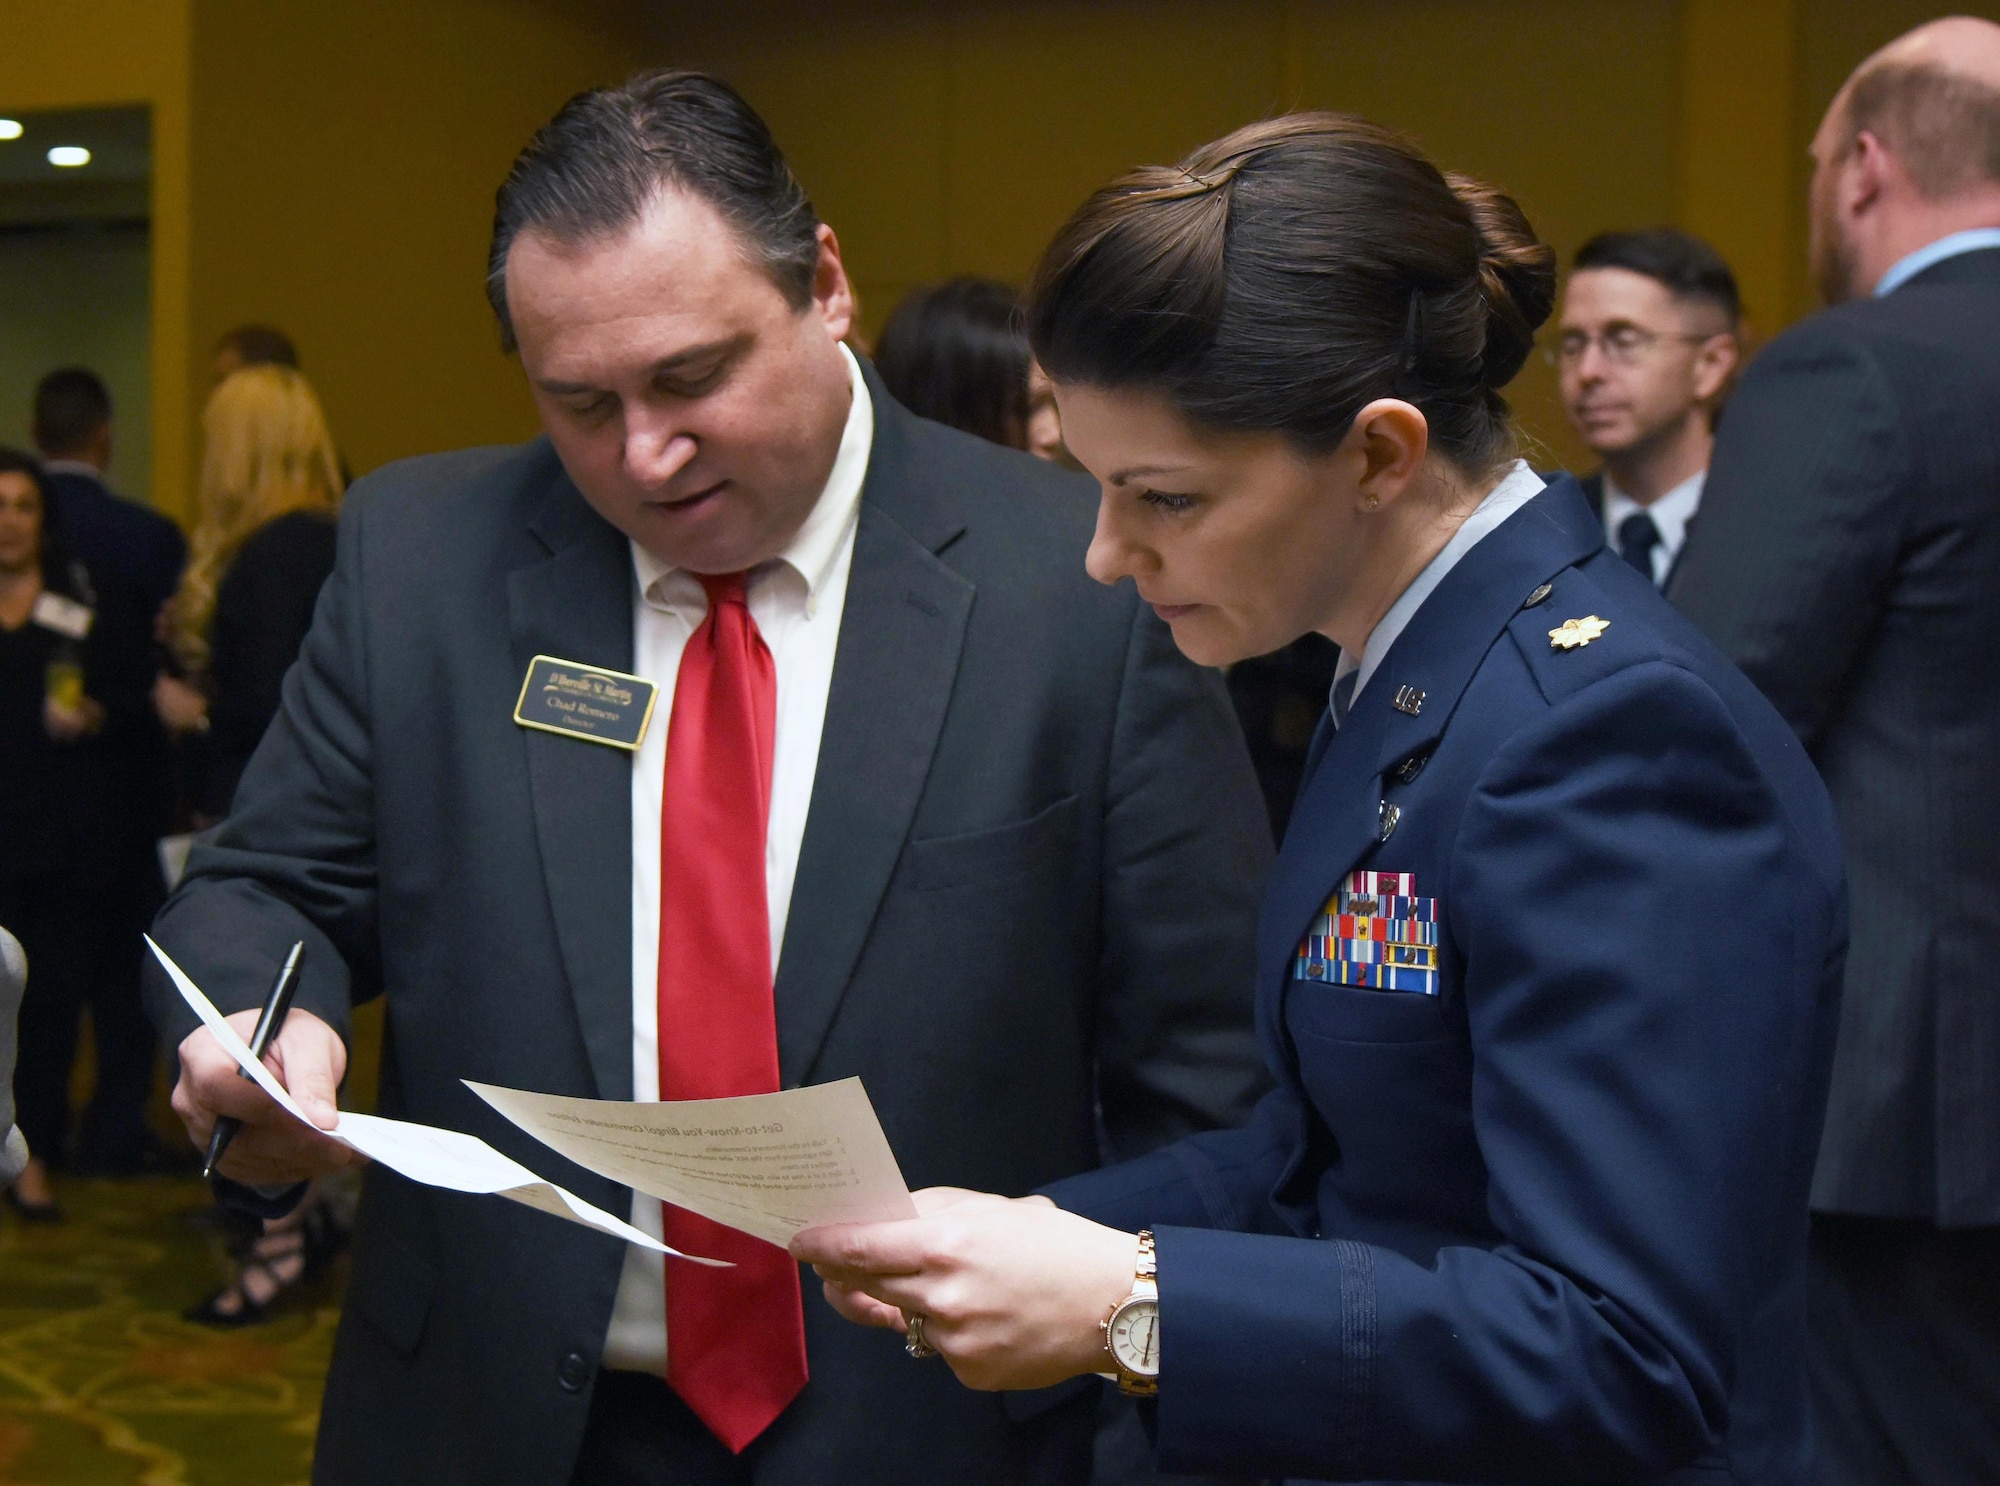 Chad Romero, D'Iberville/St. Martin Chamber of Commerce president, and U.S. Air Force Maj. Amber Ortiz, 81st Force Support Squadron commander, participate in an ice breaker game during the 2019 Honorary Commander Induction Ceremony inside the Bay Breeze Event Center at Keesler Air Force Base, Mississippi, Feb. 9, 2019. The event recognized the newest members of Keesler's honorary commander program, which is a partnership between military commanders and local civic and business leaders in order to enrich and strengthen the relationship between the base and the community. This was the first time leadership from the 2nd Air Force, 81st Training Wing and 403rd Wing combined to host a single joint induction ceremony. (U.S. Air Force photo by Kemberly Groue)